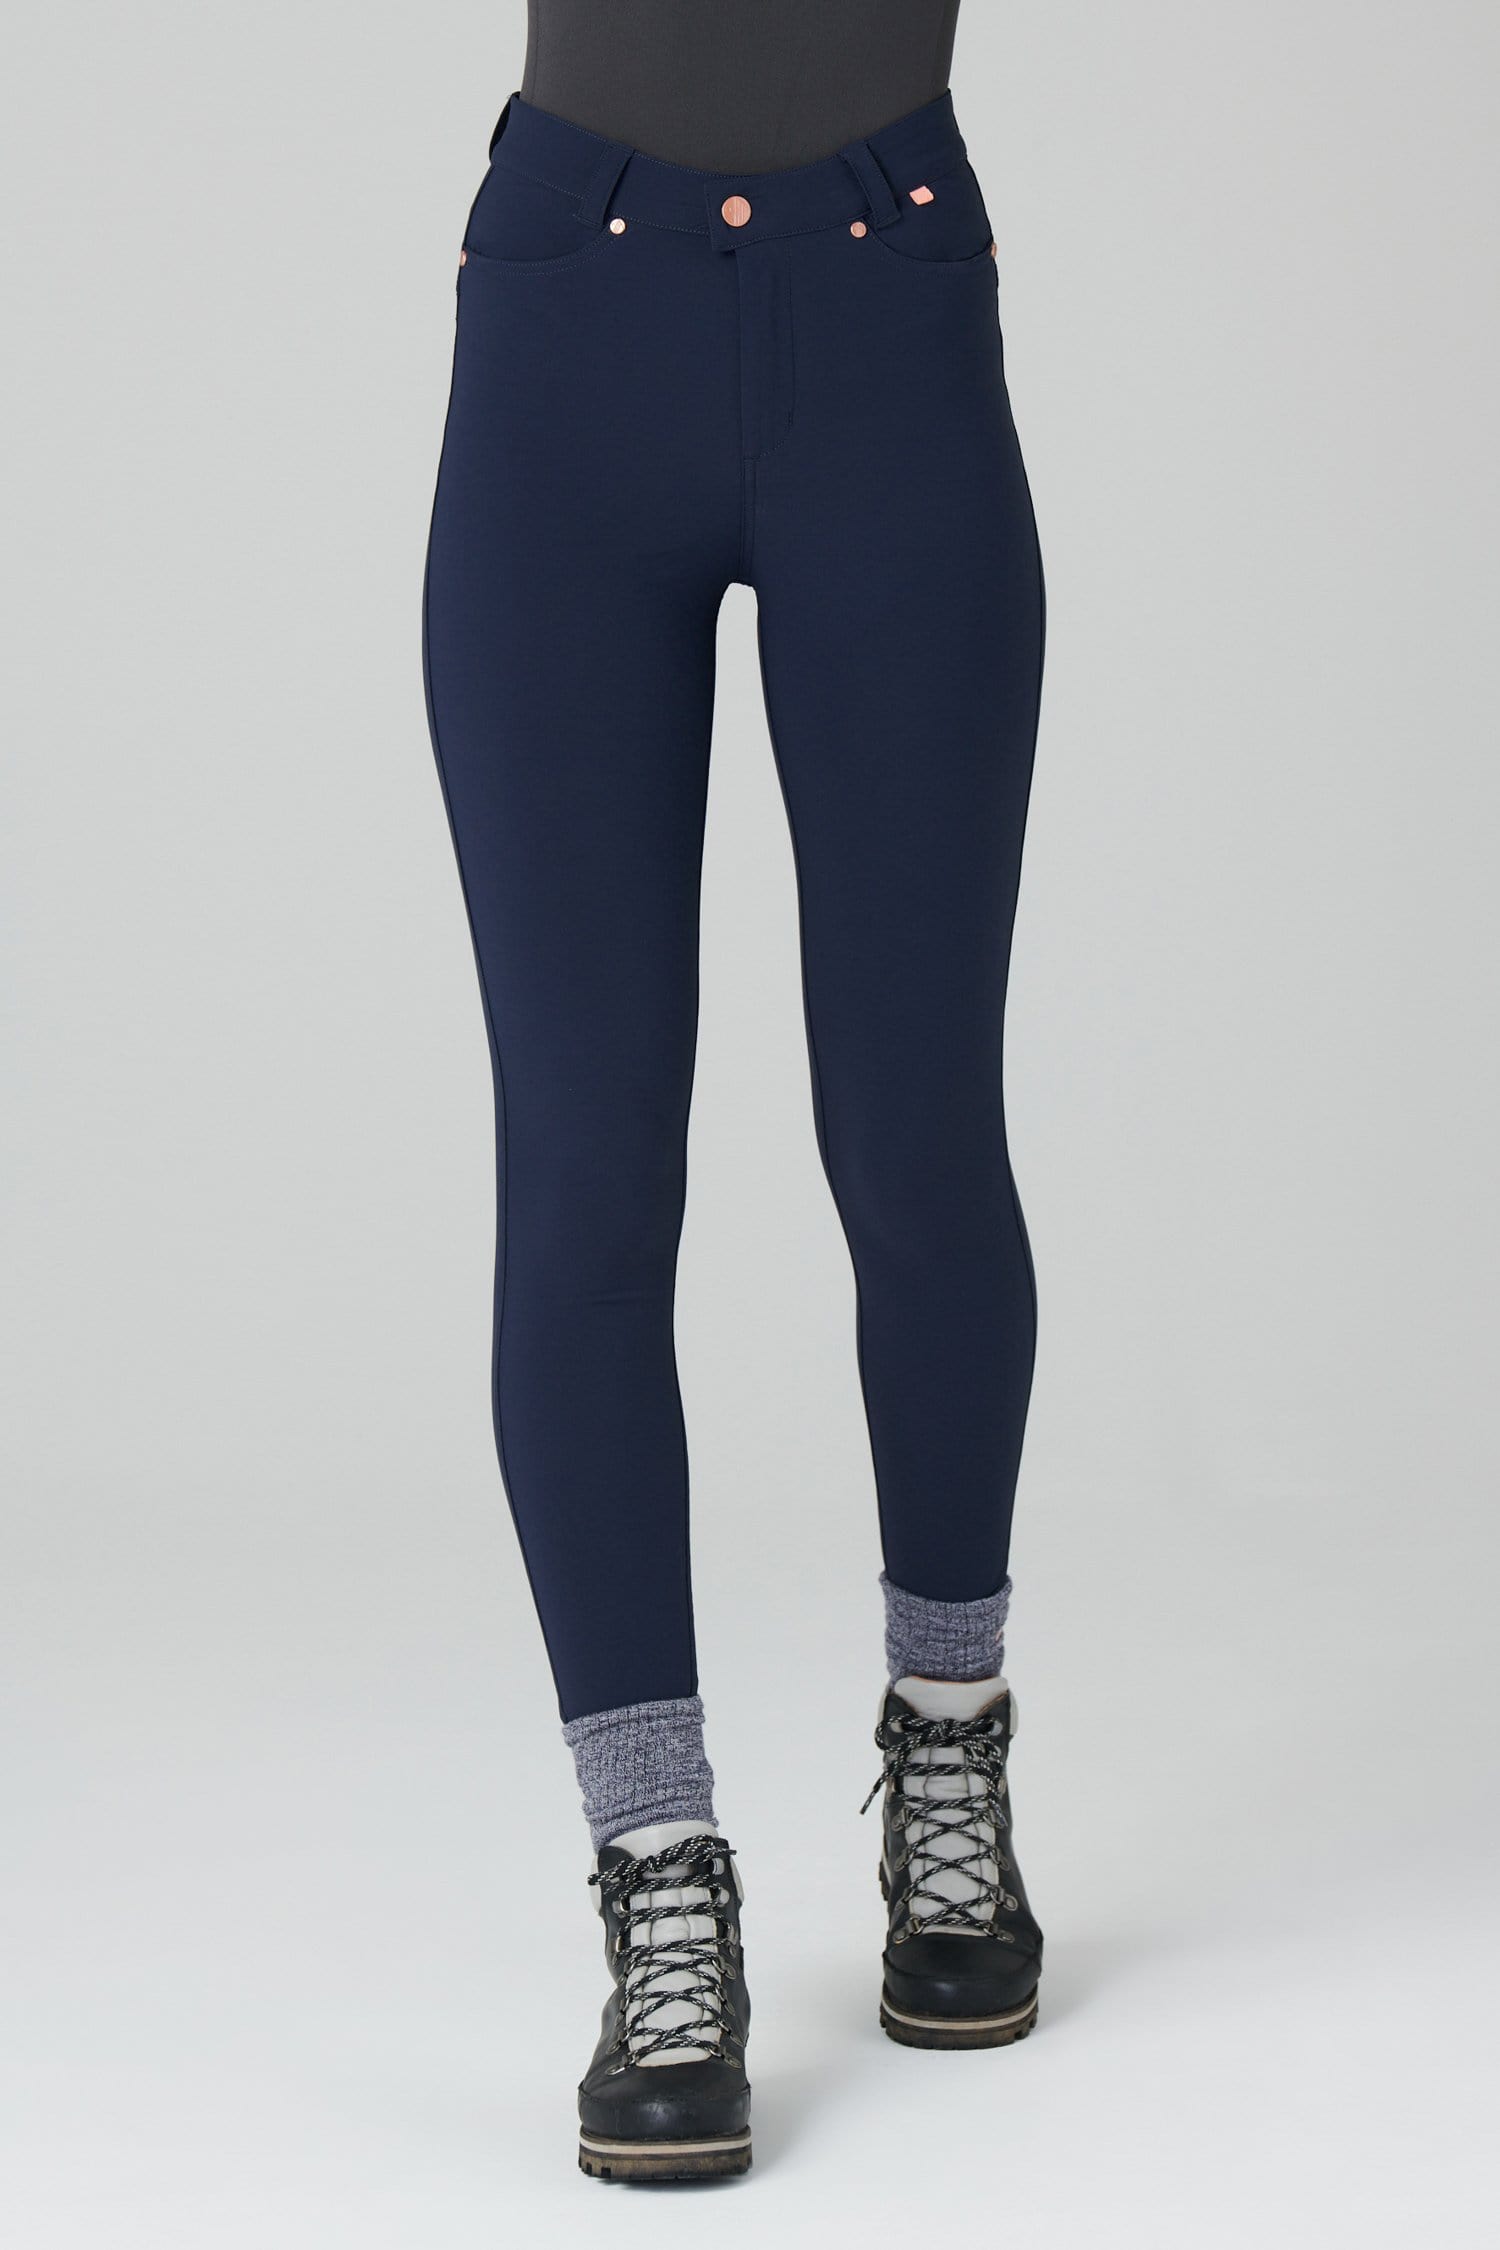 Max Stretch Skinny Outdoor Trousers - Deep Navy - 26p / Uk8 - Womens - Acai Outdoorwear